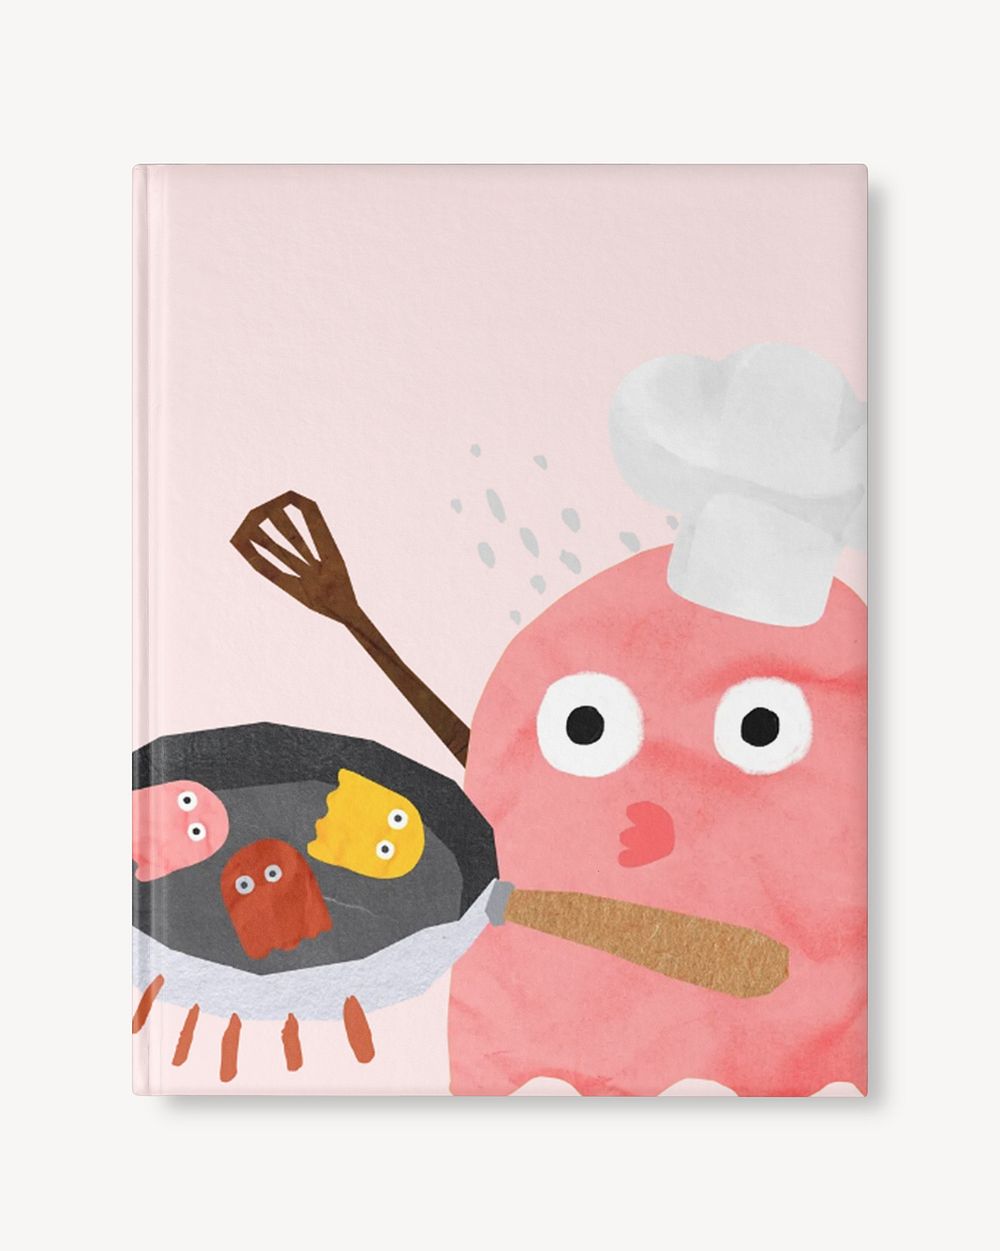 Cute pink hardcover book, cooking monster character design